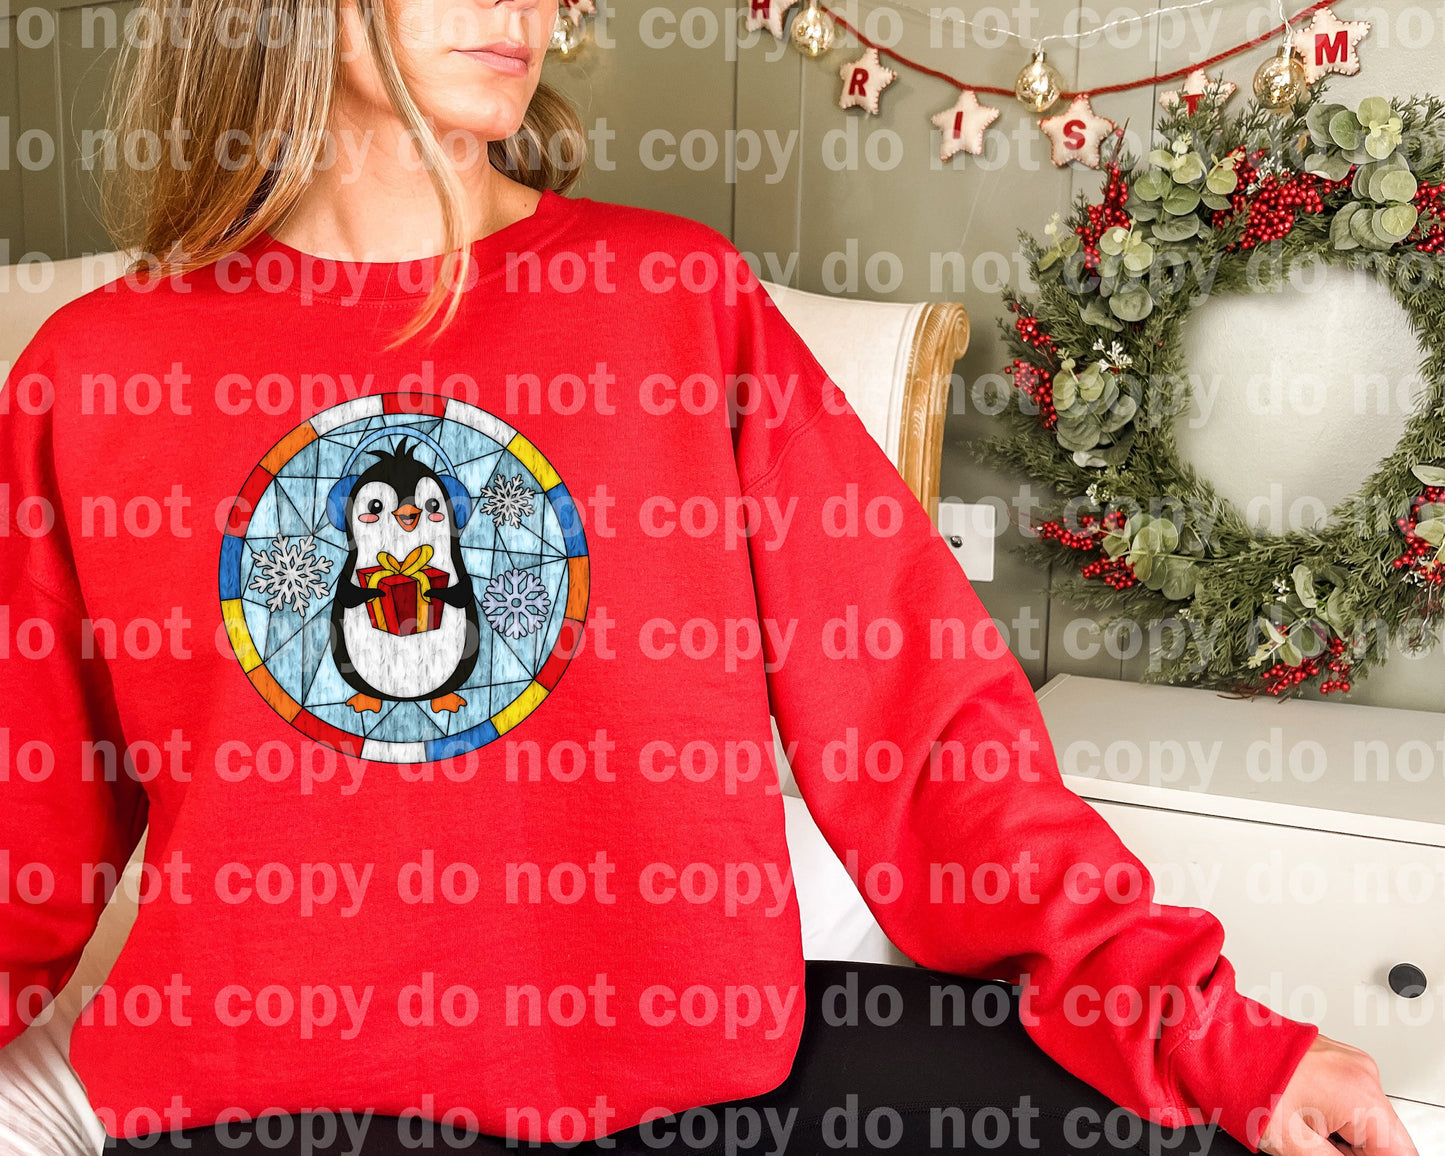 Stained Glass Penguin Present Round Dream Print or Sublimation Print